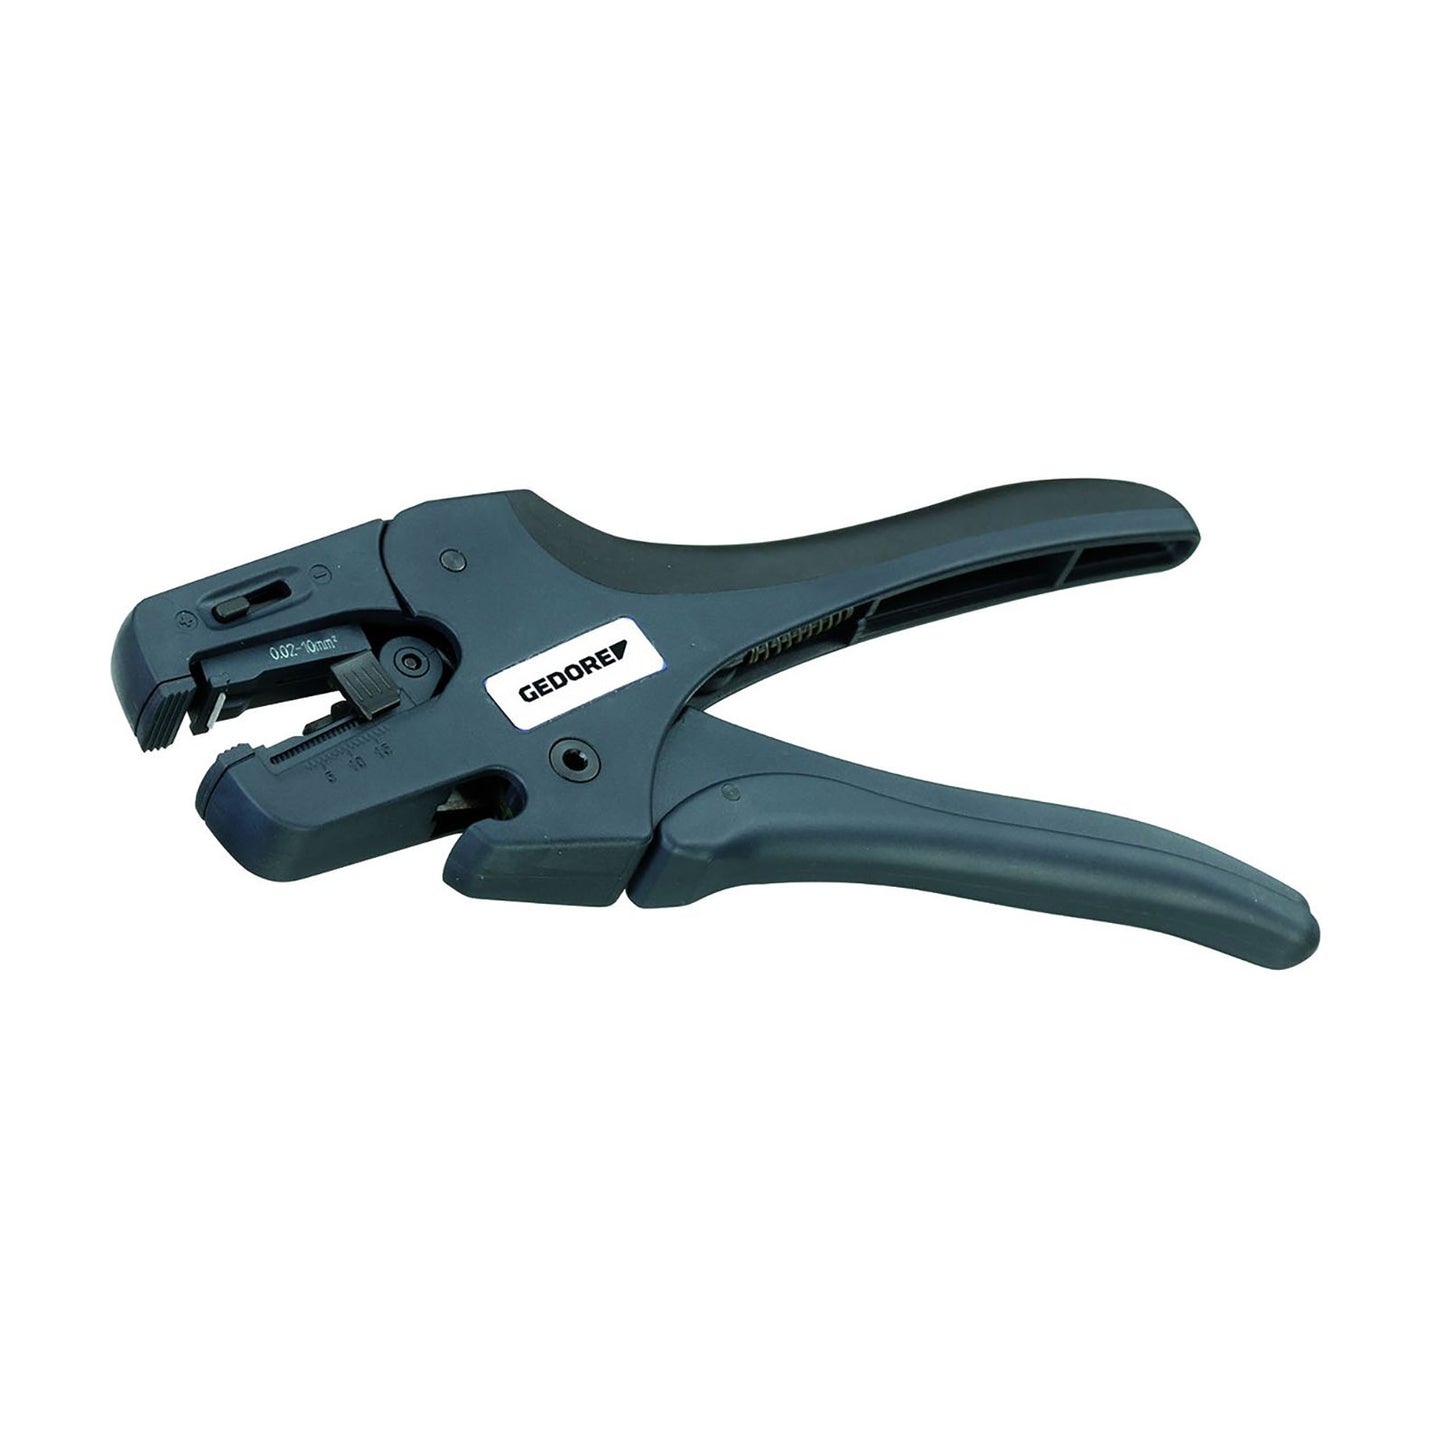 GEDORE 8146 - Moduar Wire Stripping Pliers (1830805)